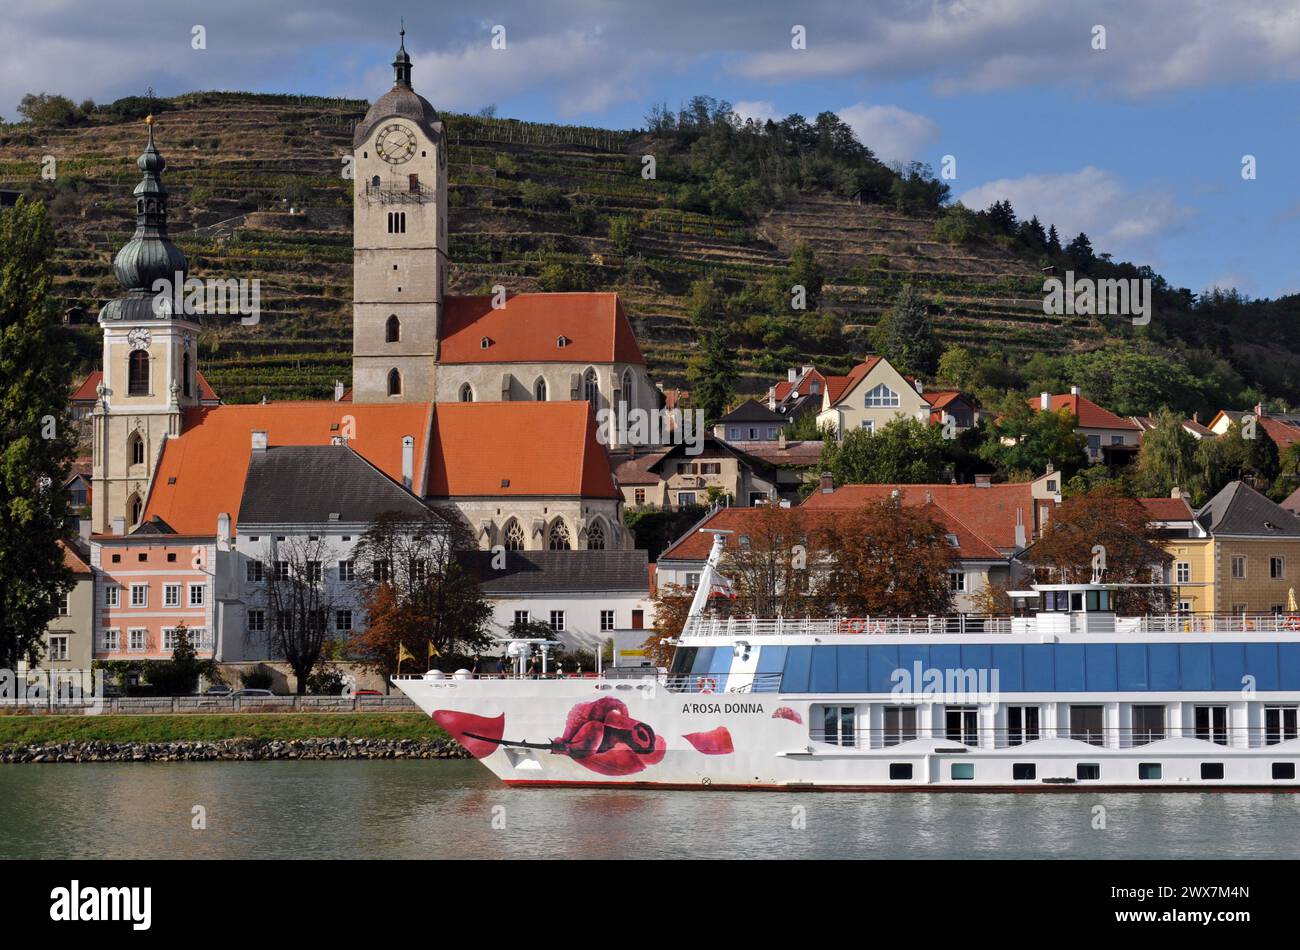 A Danube River cruise ship is docked at the historic city of Krems in Lower Austria's scenic Wachau Valley. Stock Photo